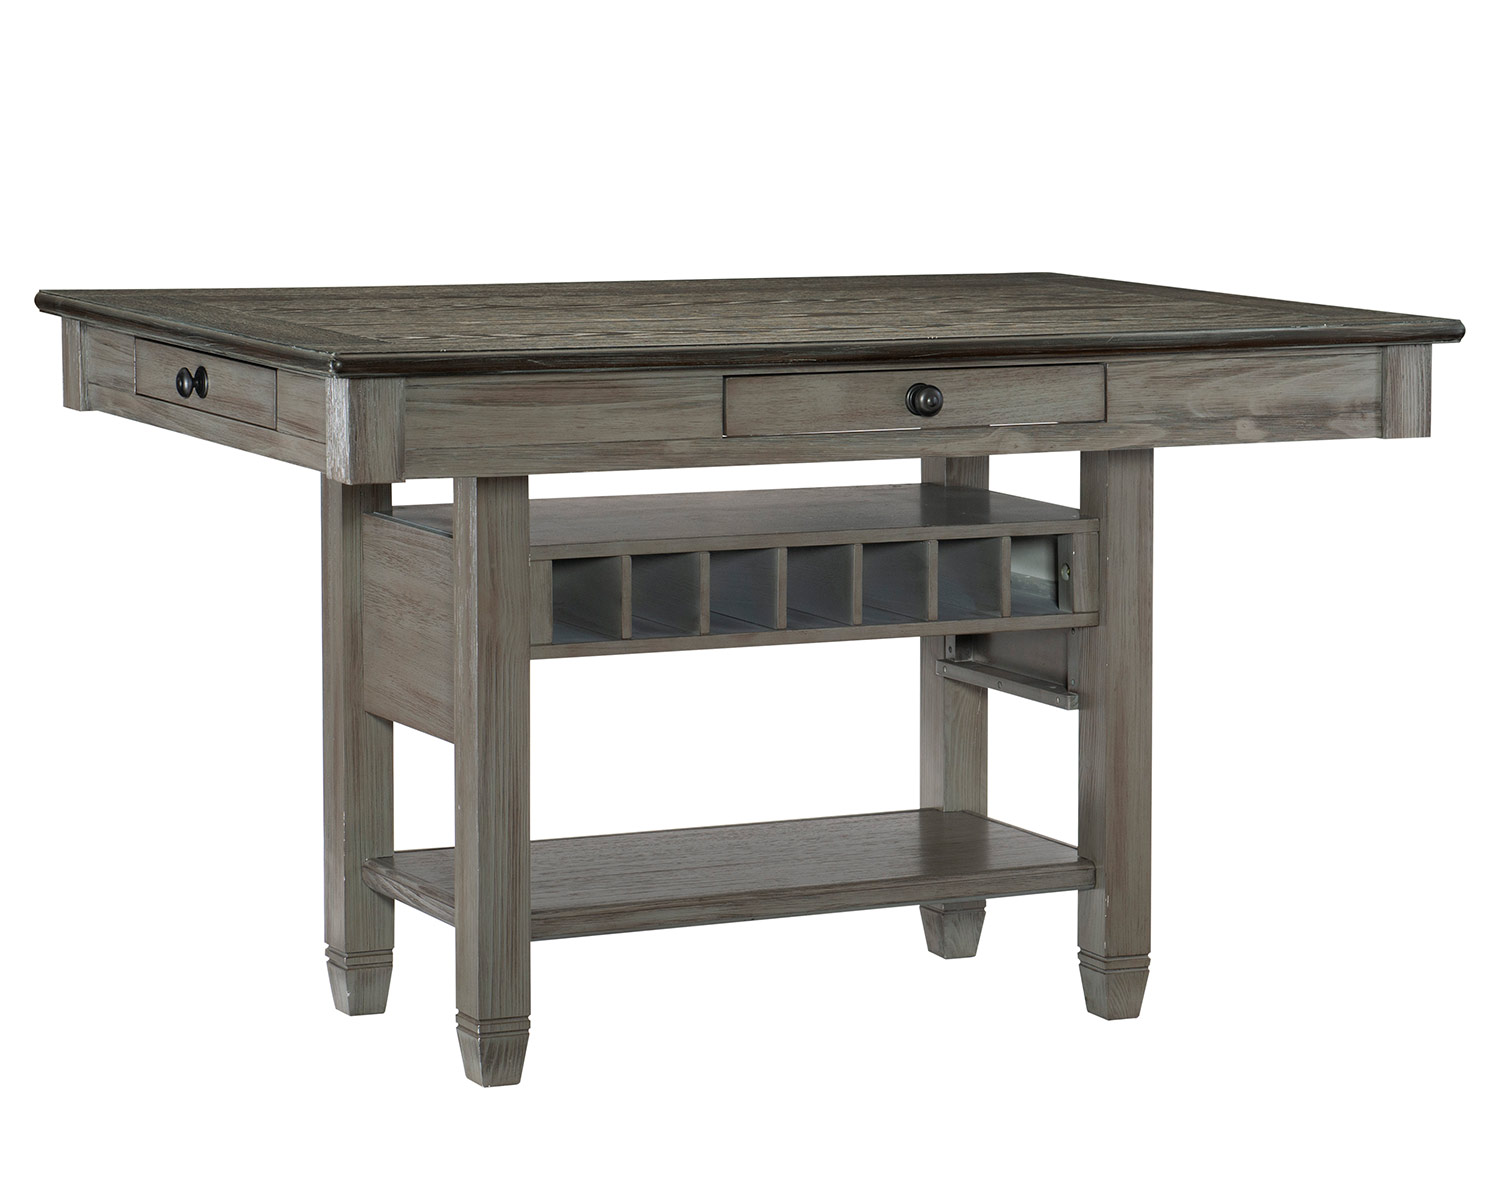 Homelegance Granby Counter Height DiningTable - Antique Gray and Coffee